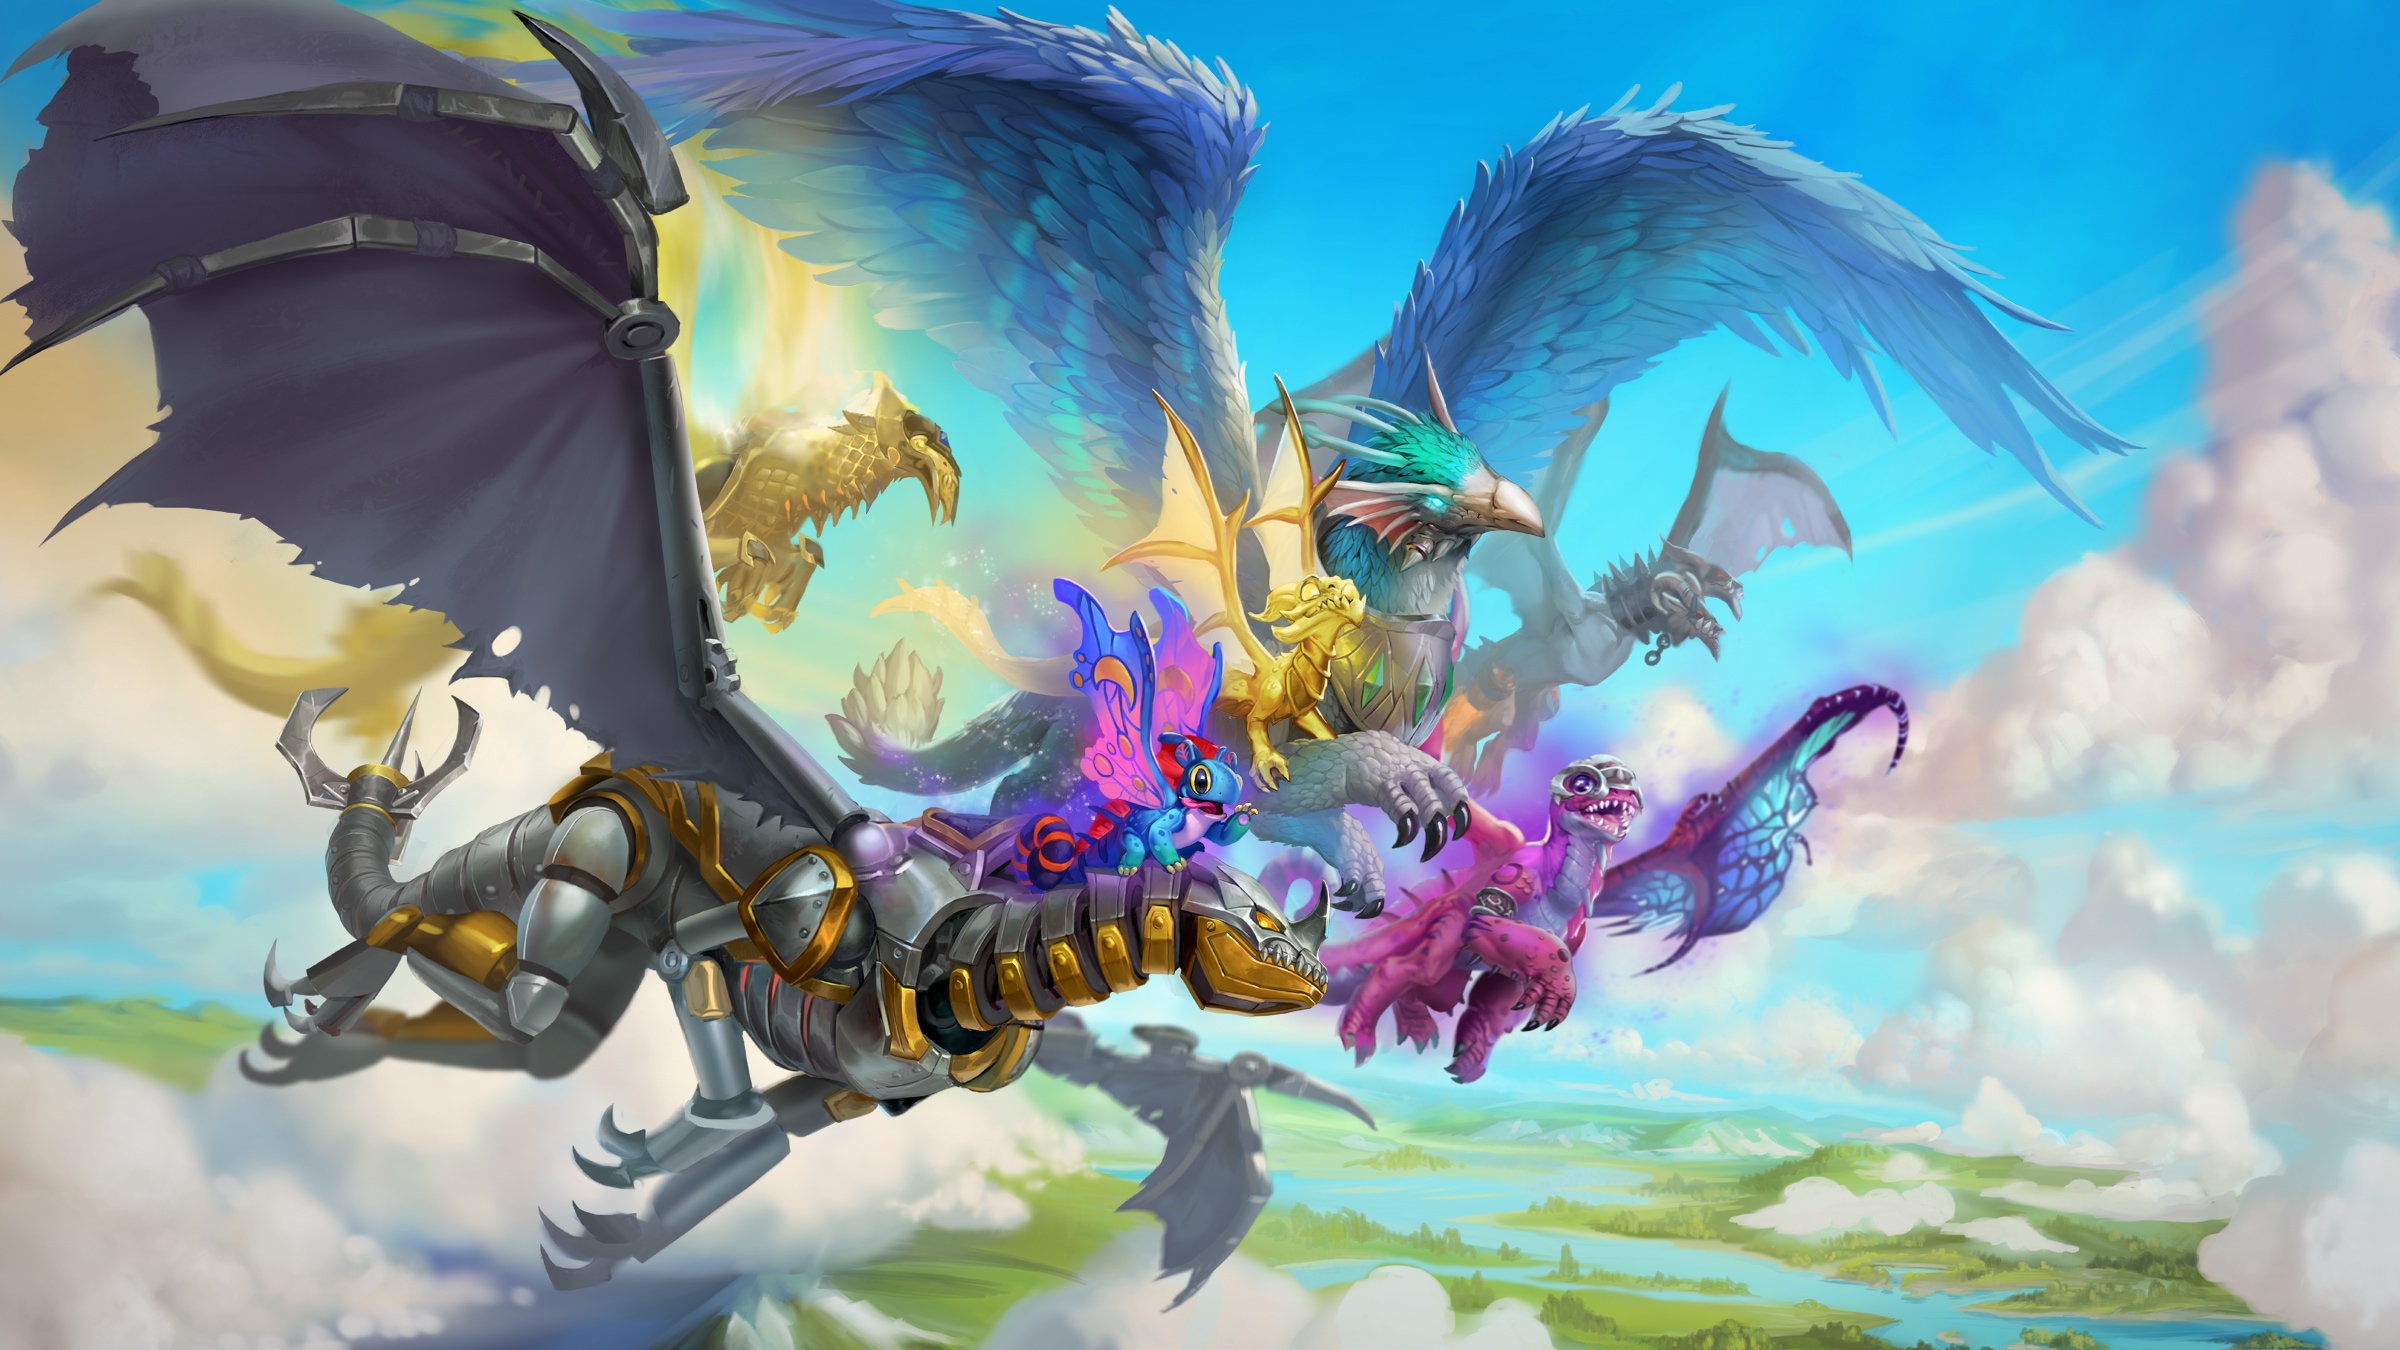 Save up to 65% on Draconic Pets and Mounts with the Dragon Pack!